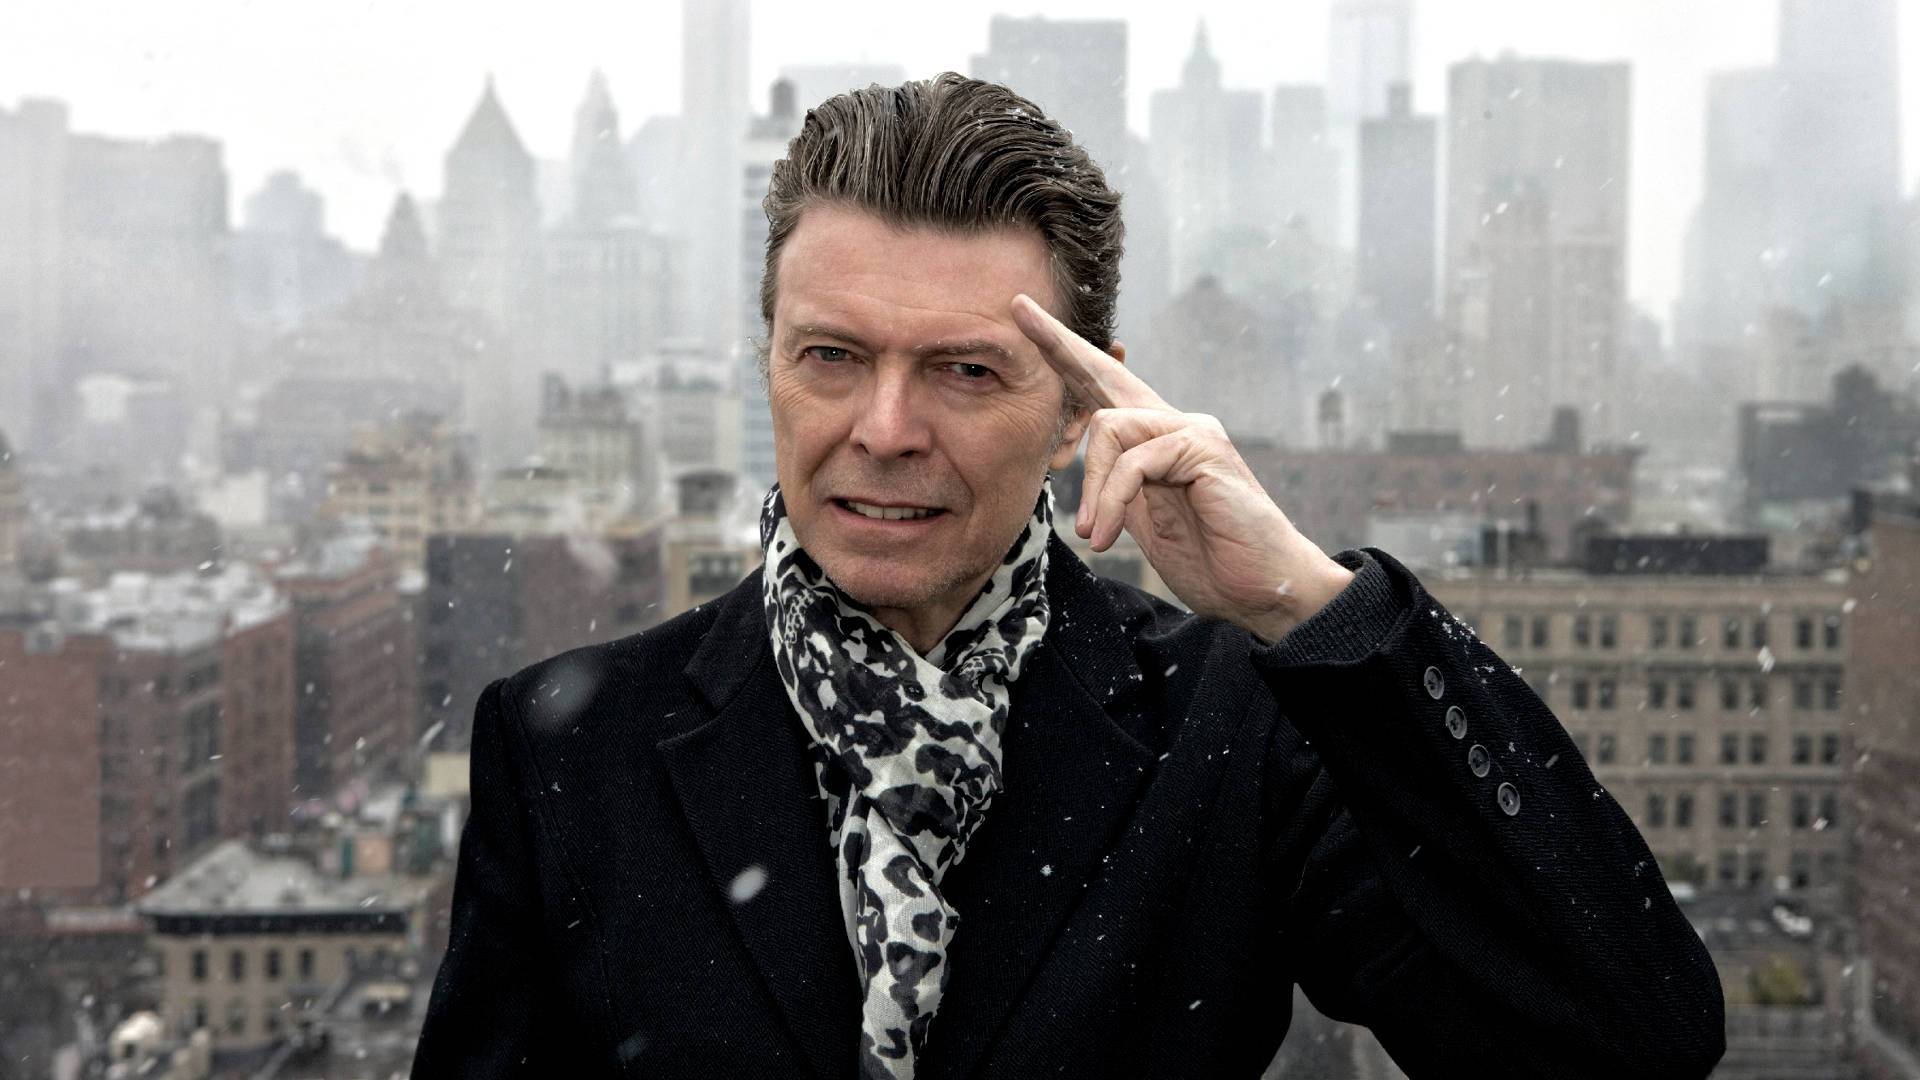 David Bowie Cityscape In Snow Background